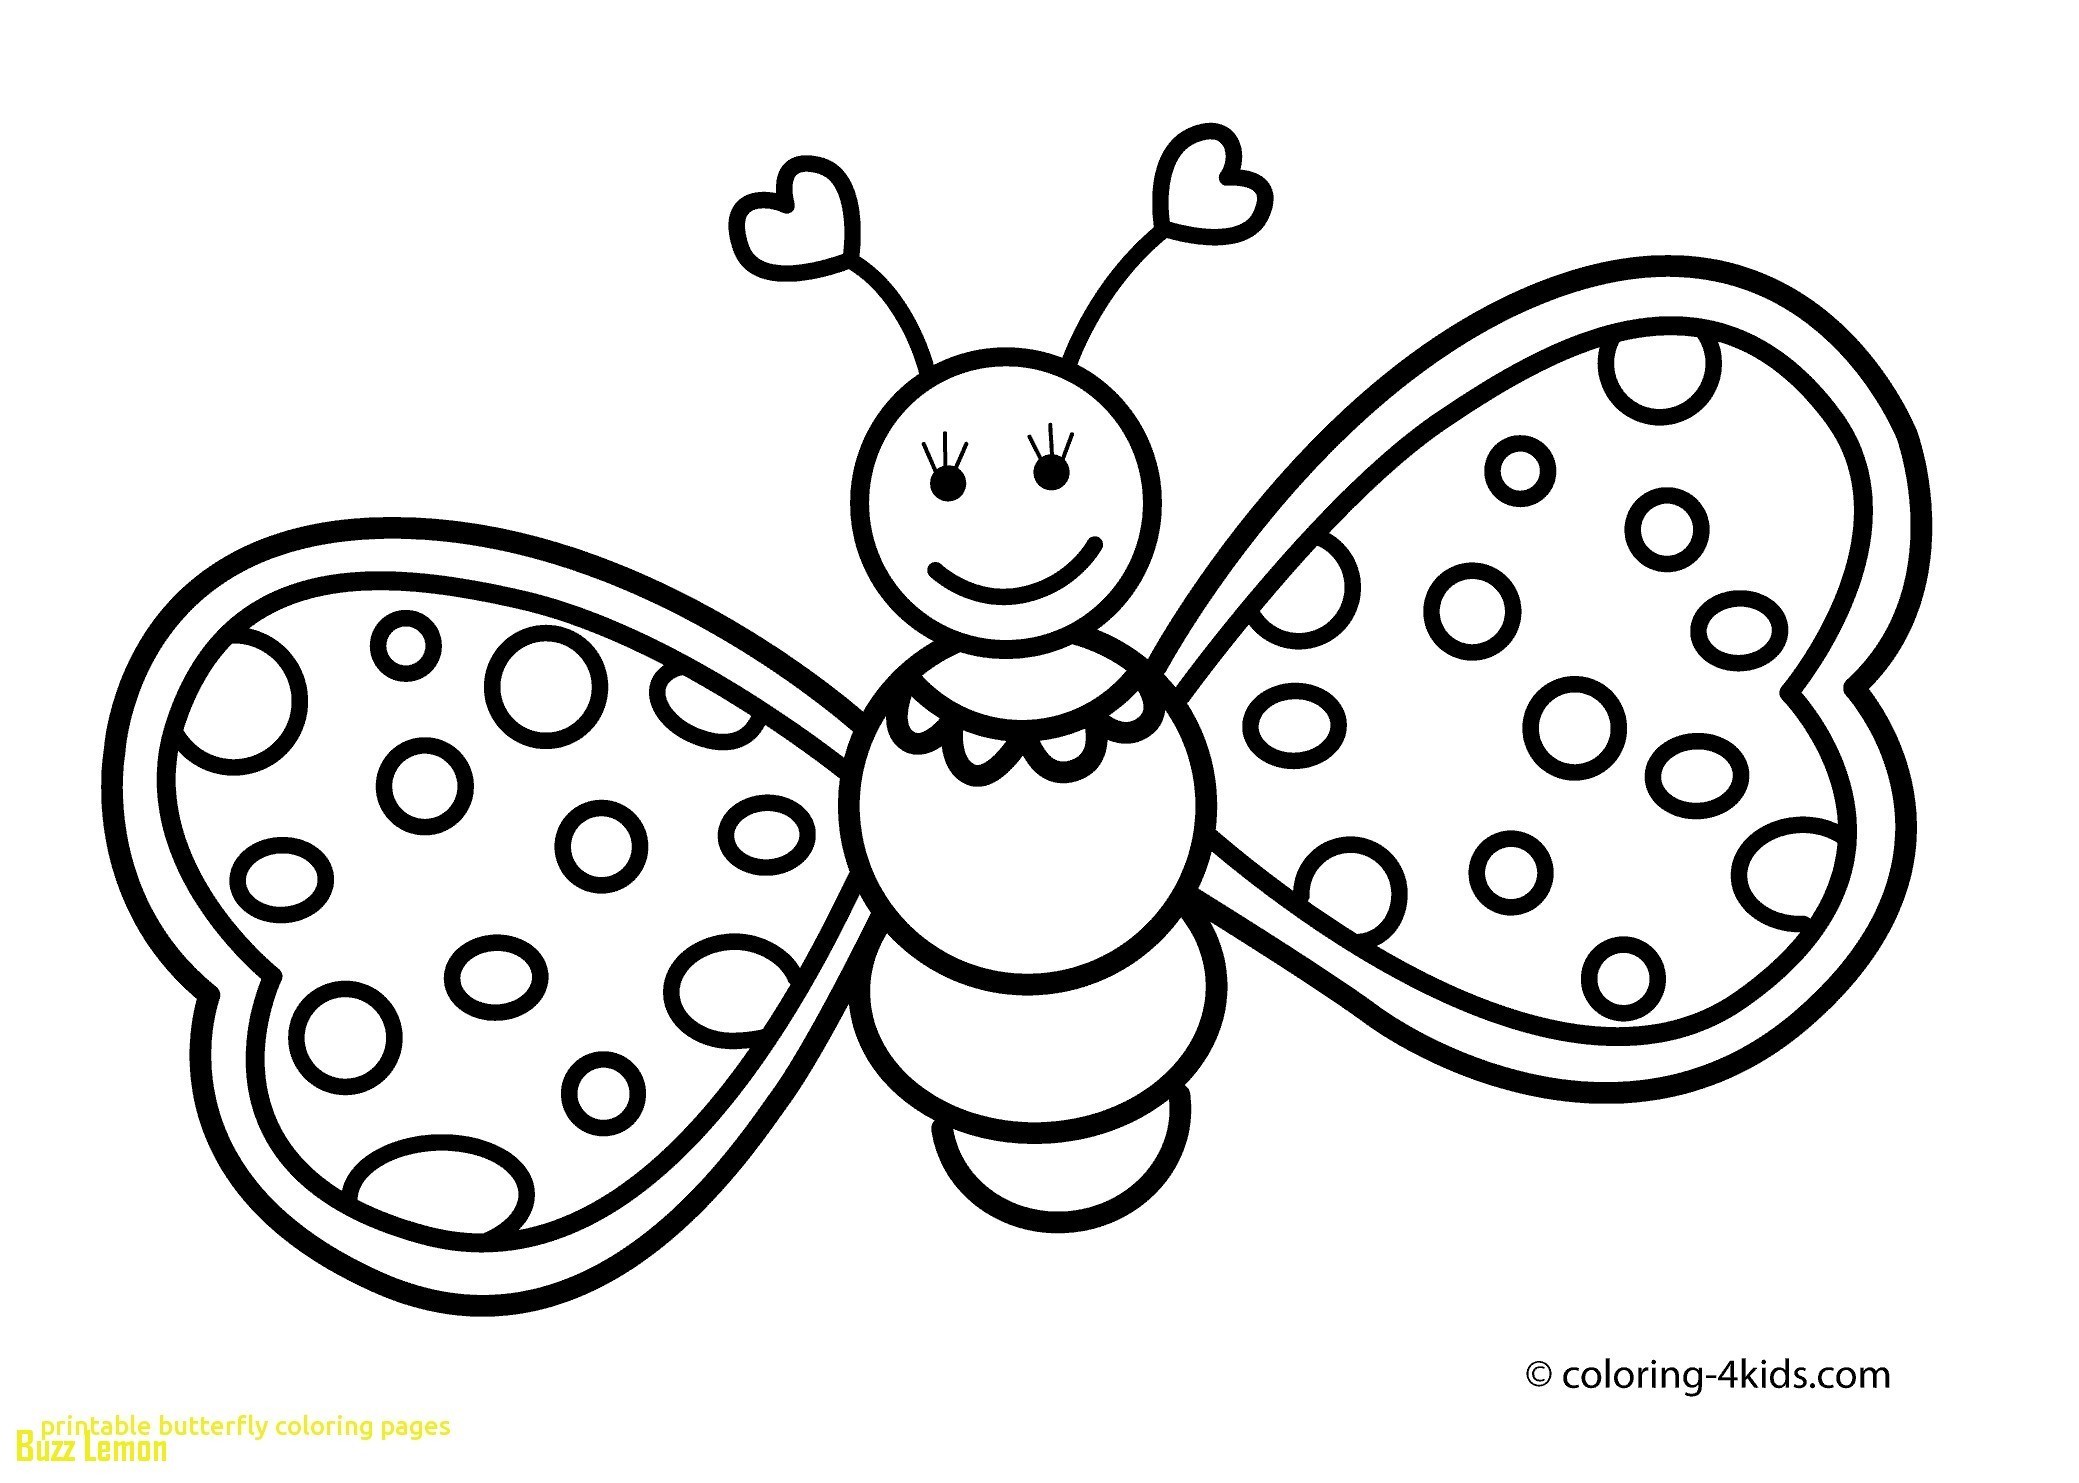 A butterfly Coloring Page